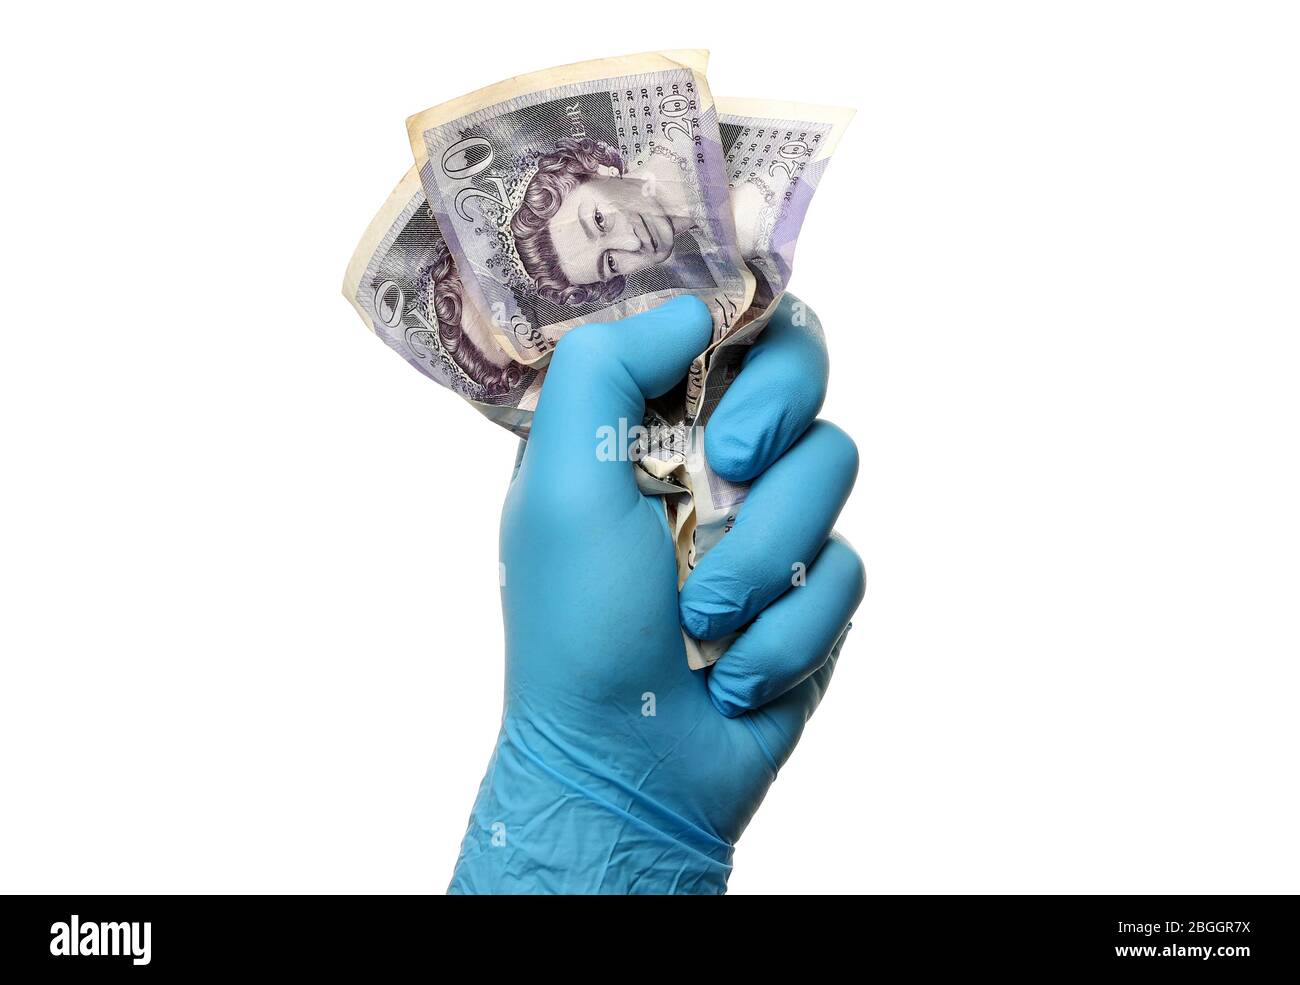 Covid 19 finance concept image of a man in a surgical rubber glove holding UK 20 pound notes as coronavirus crushes the economy Stock Photo